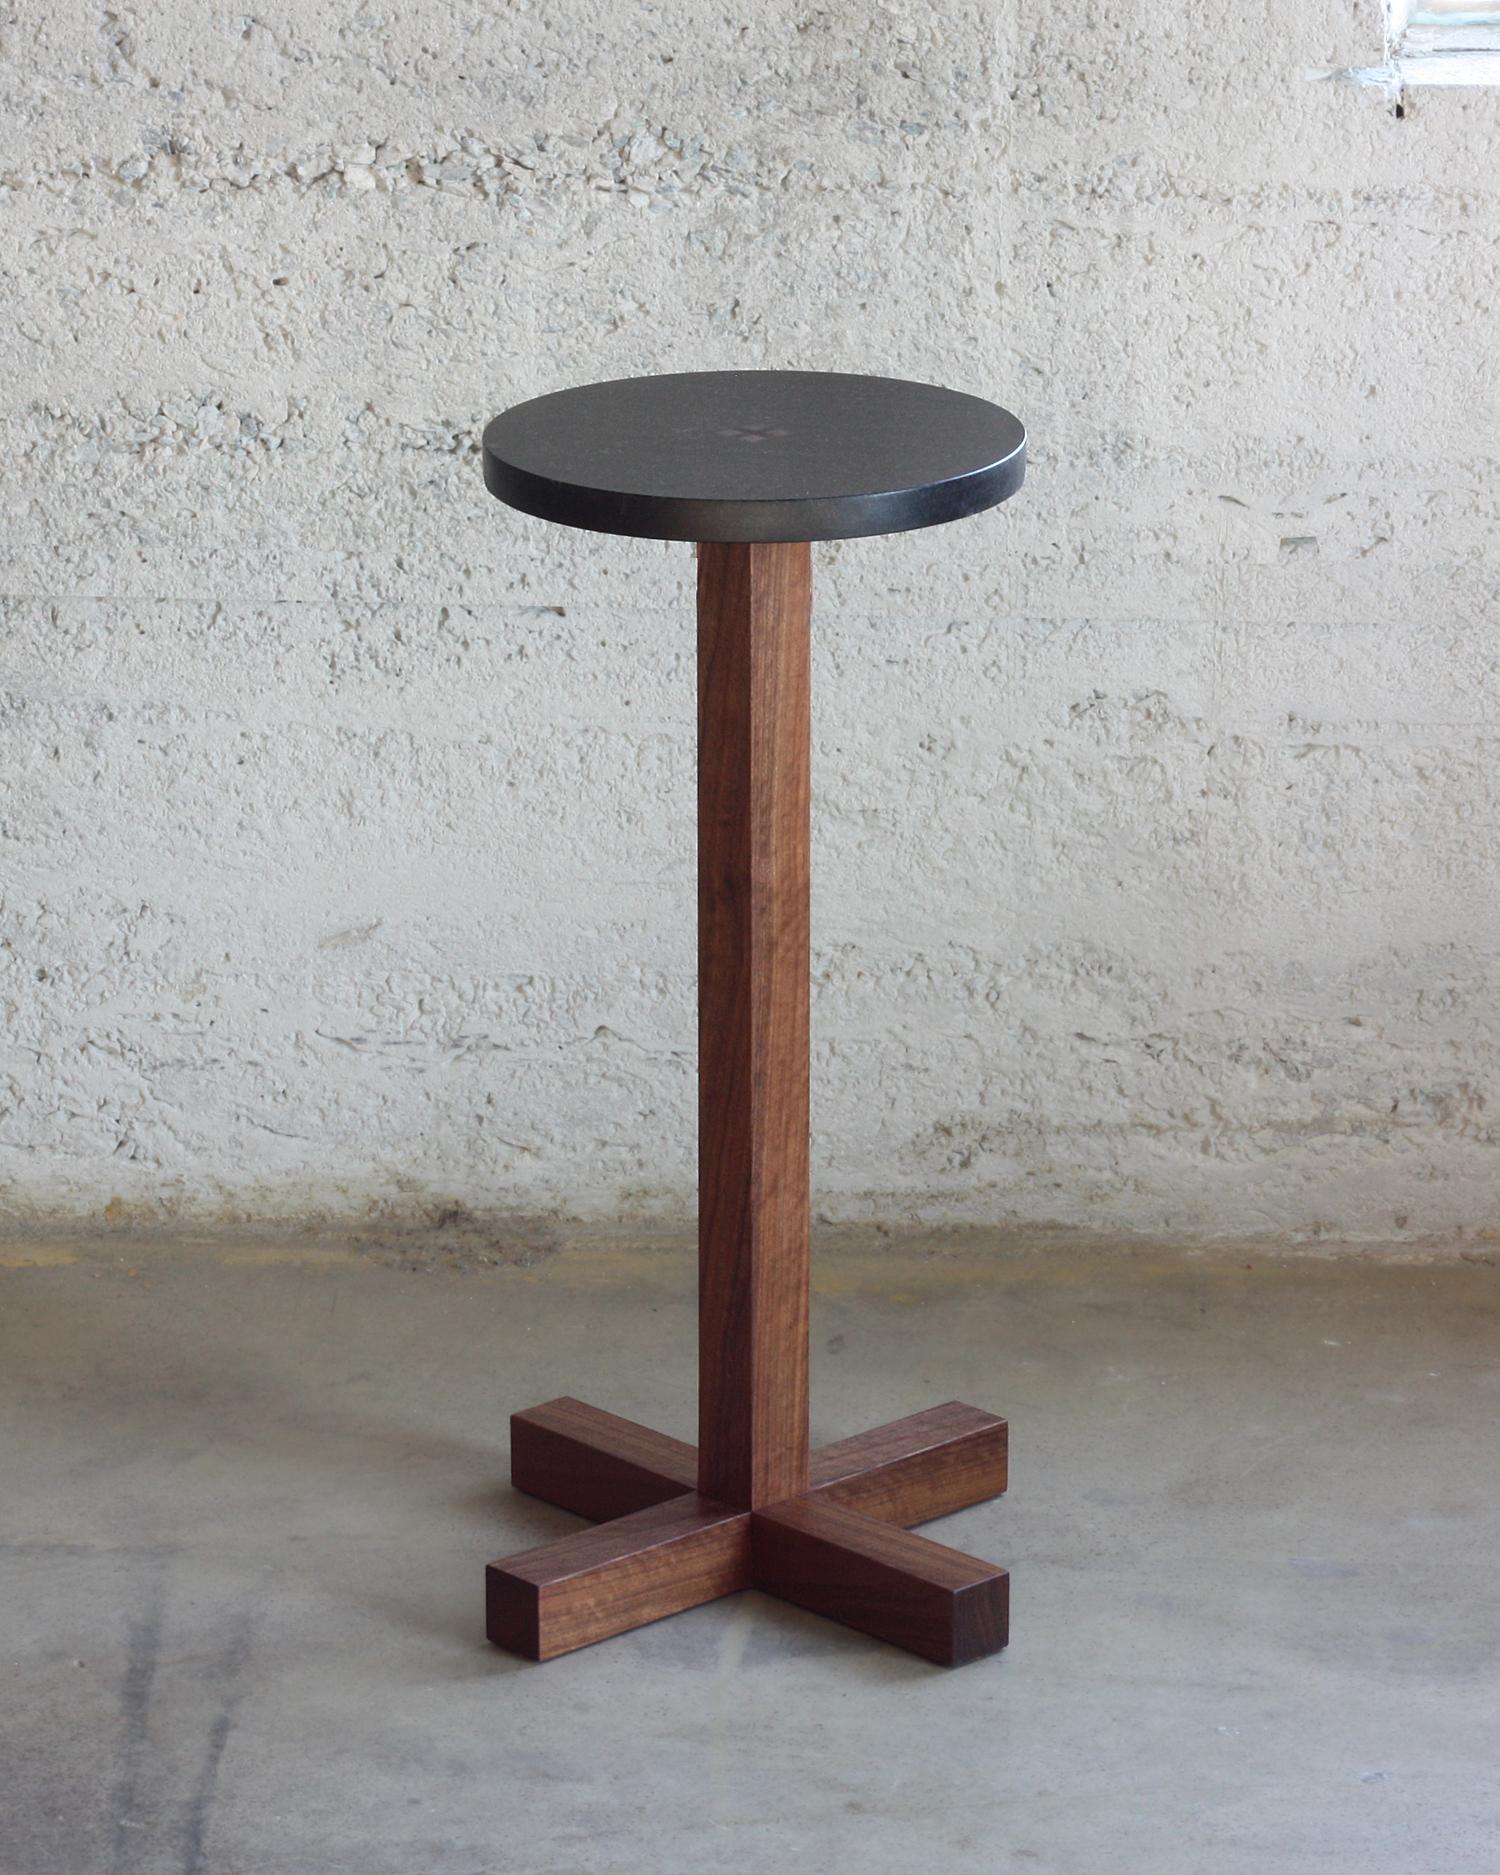 Hand-Crafted Drink Table in Black Granite and Walnut